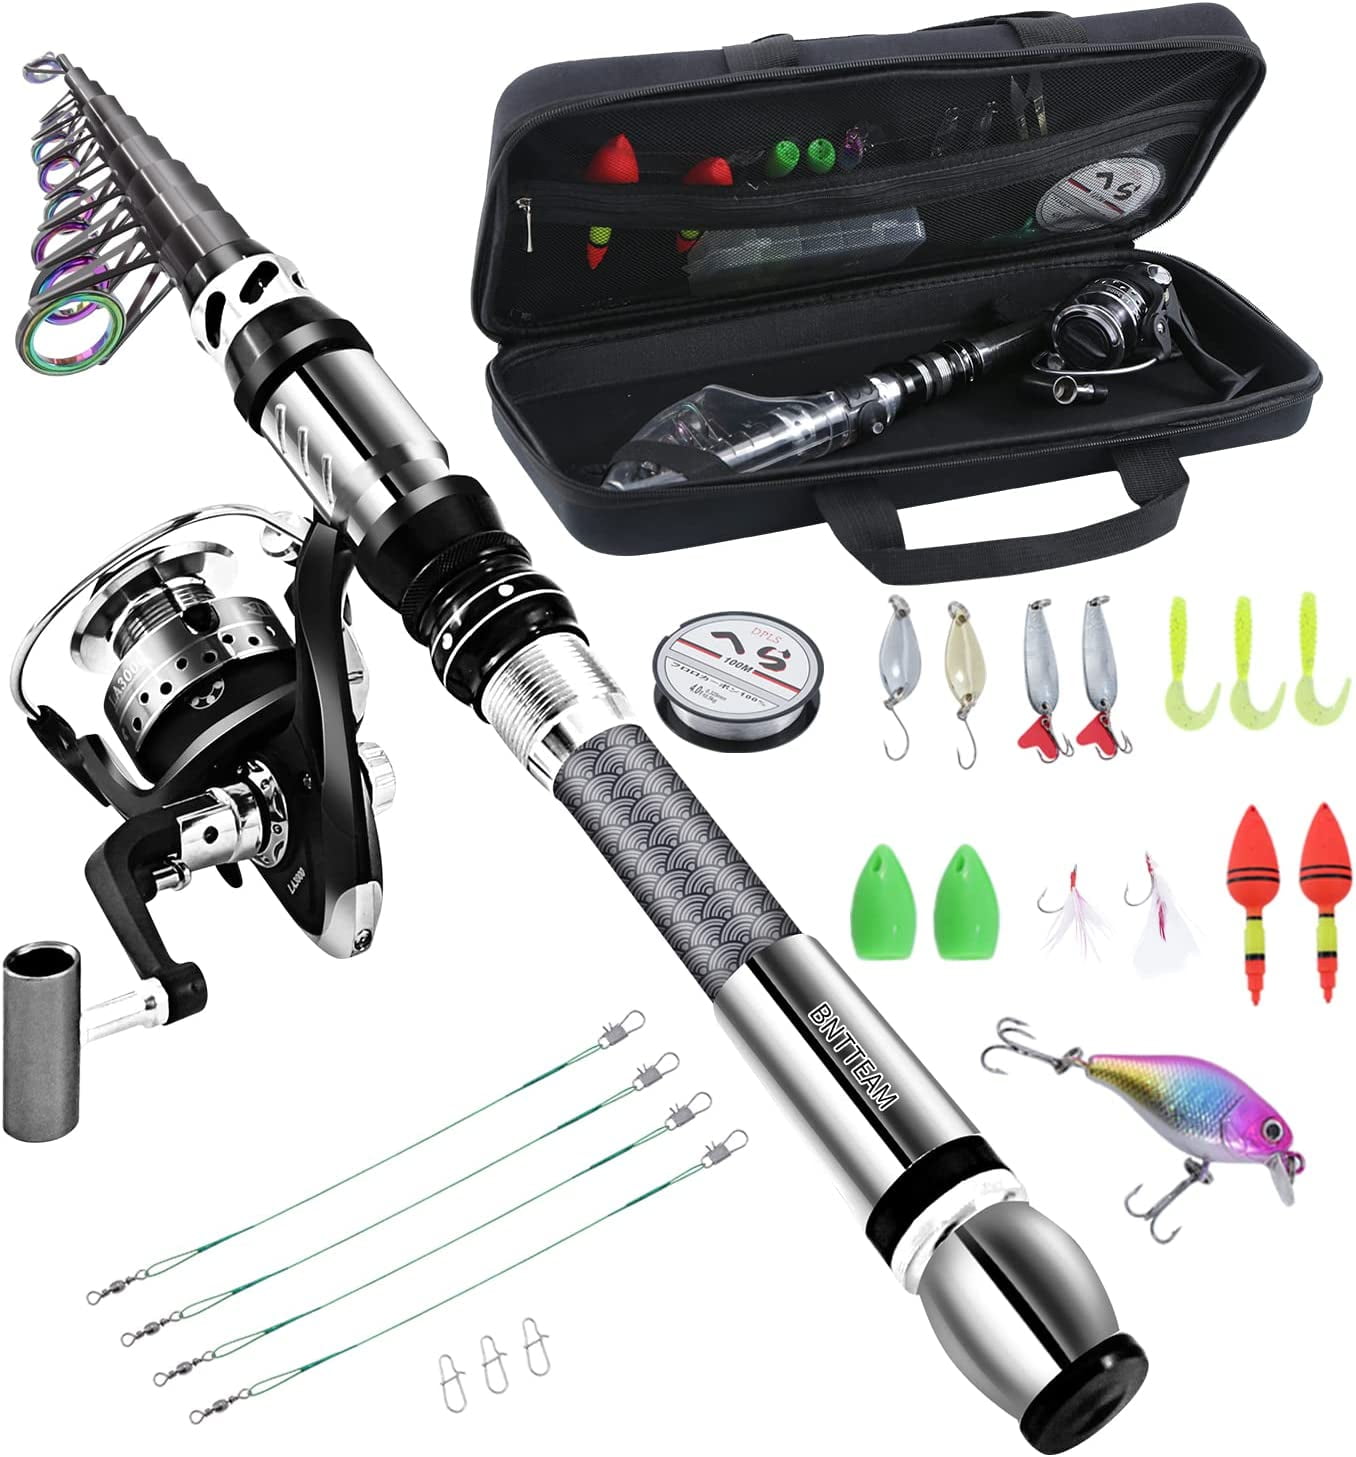 BNTTEAM Portable Fishing Spinning Rod and Reel Combo set Carbon